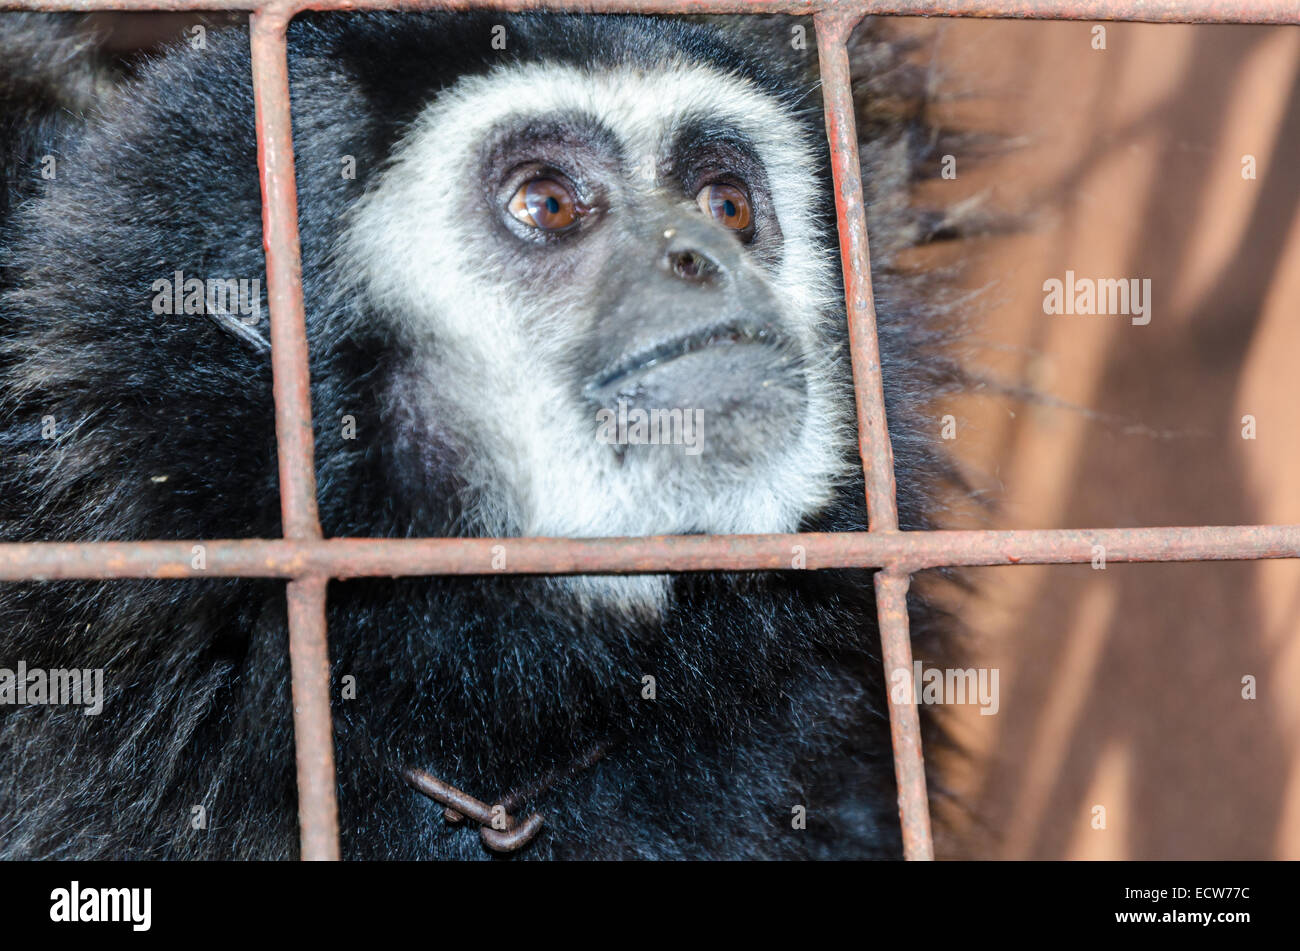 Face and eyes downcast of White-handed gibbon (Hylobates lar) in a cage. The problem of illegal wildlife trade Stock Photo